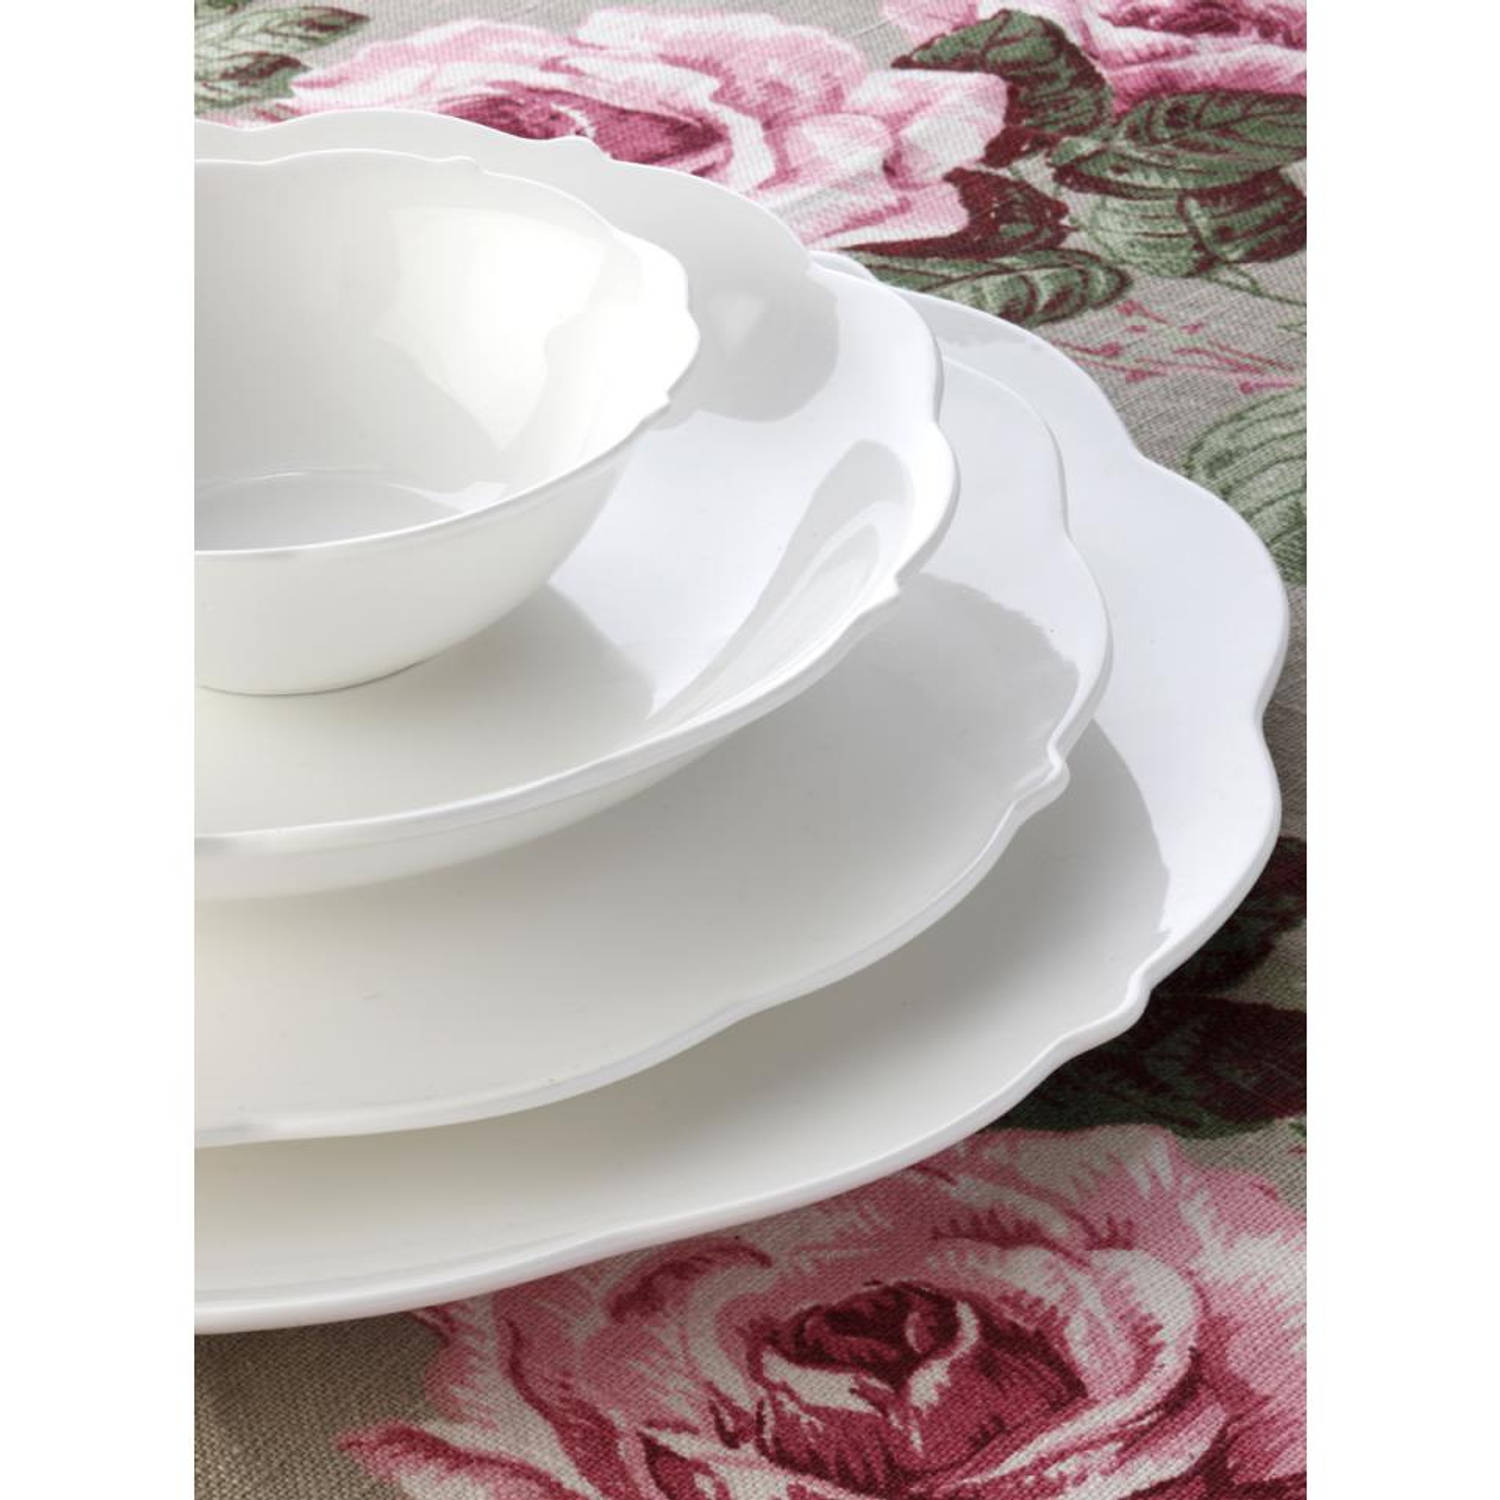 Maxwell and White Rose koffie & dinerset serviesset 30-delig - 6 persoons | Blokker